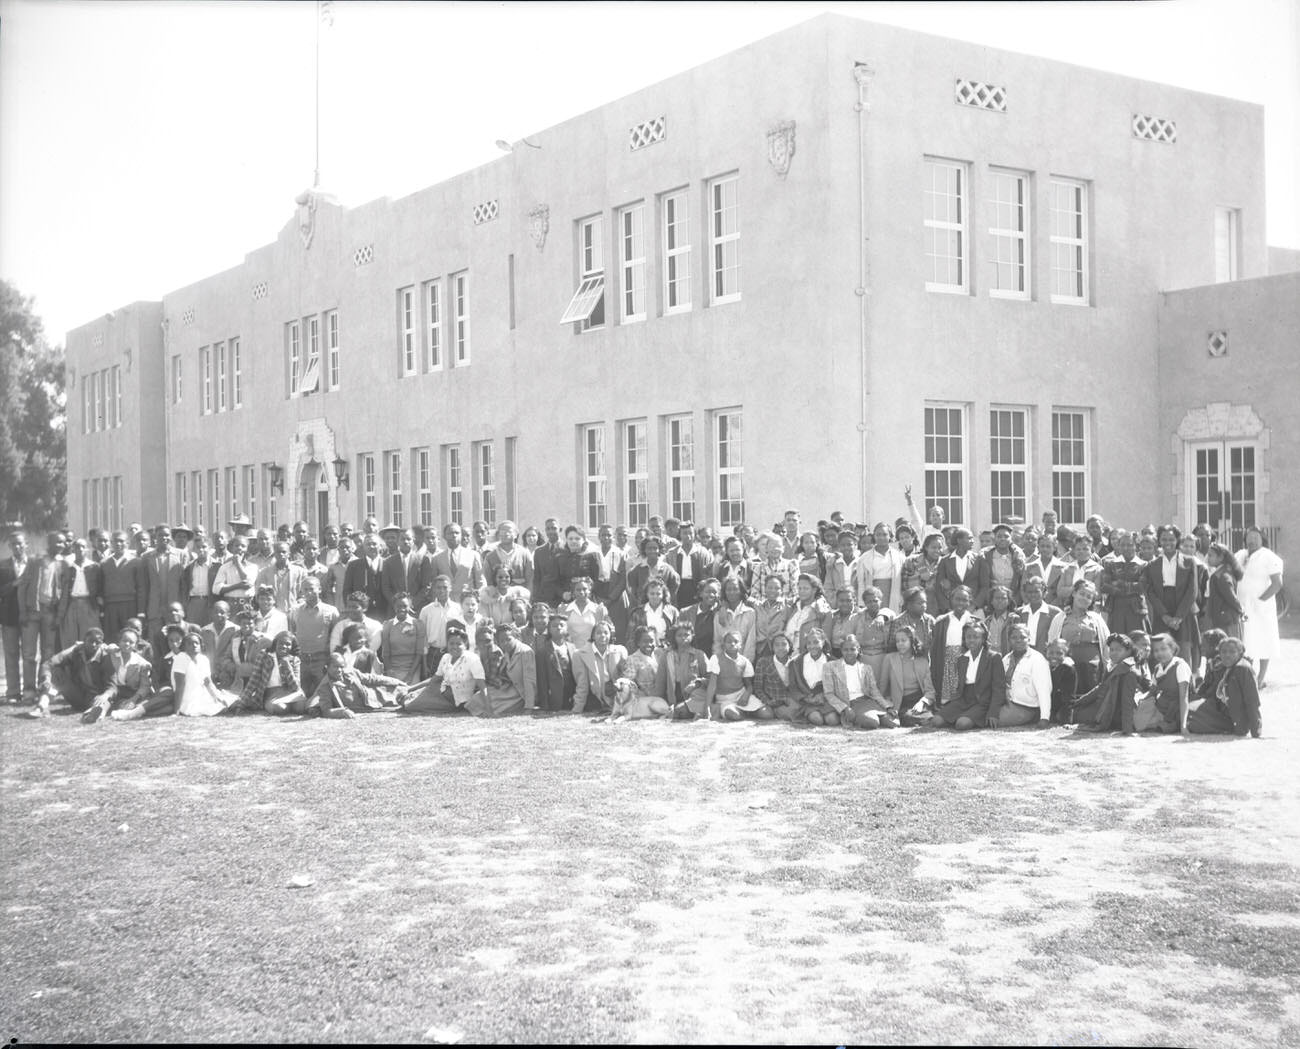 Students and Staff Outside of the Phoenix Union Colored High School, 1942